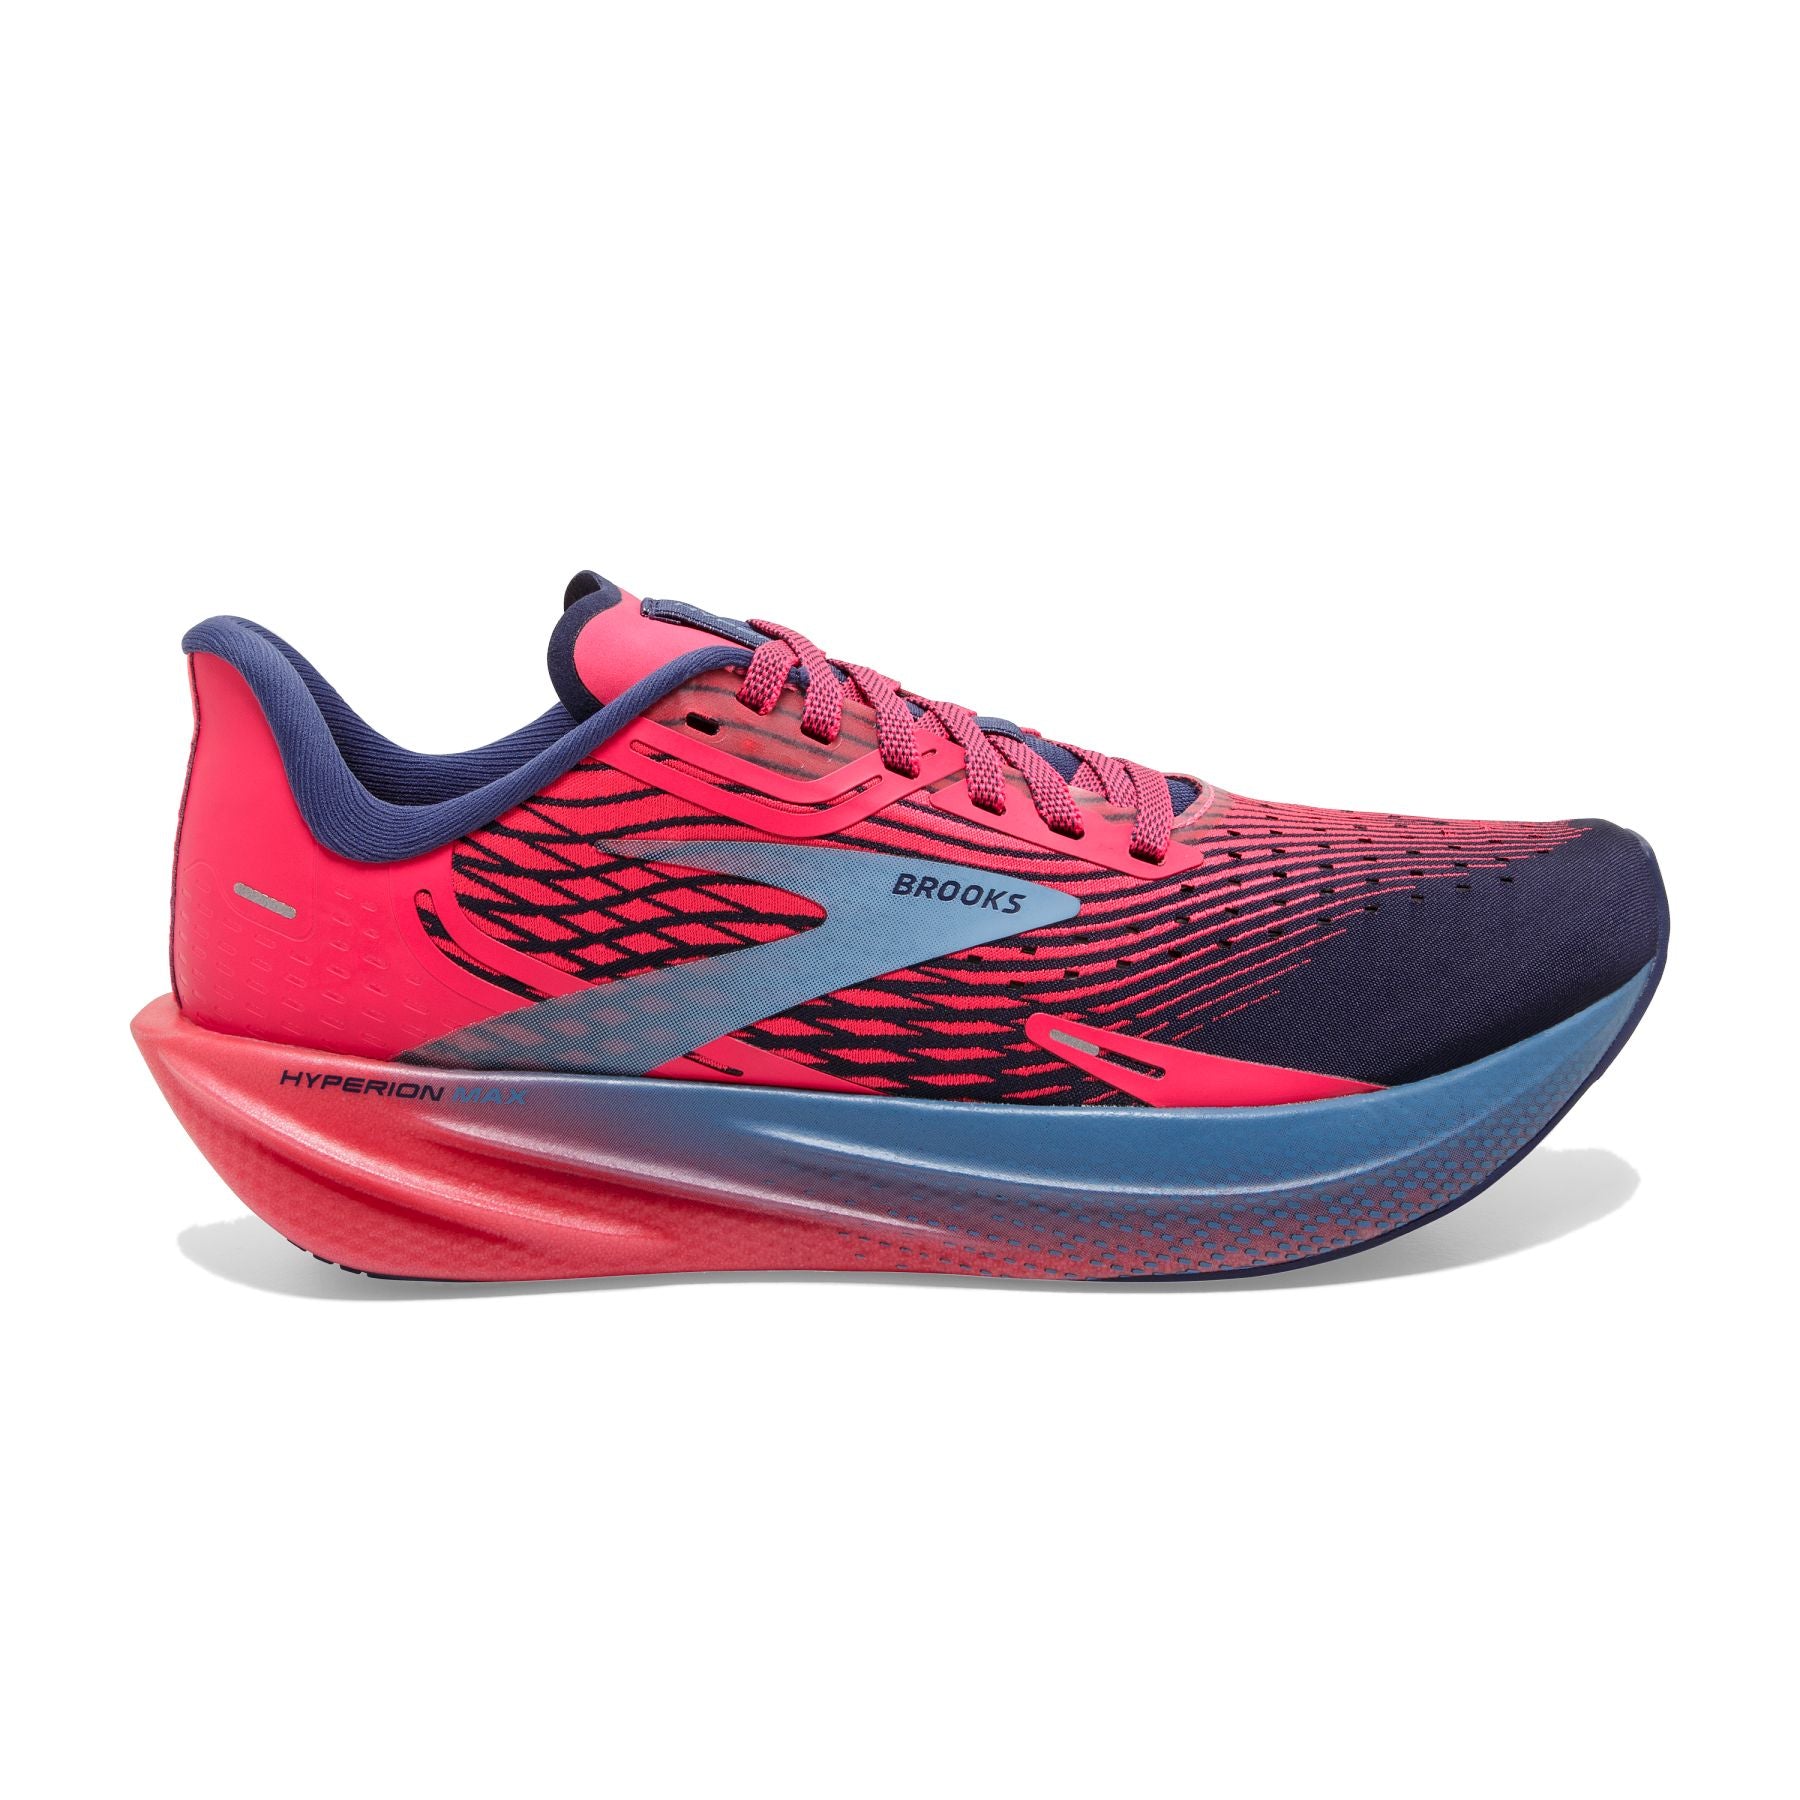 Lateral view of the Women's Hyperion Max by BROOKS in the color Pink/Cobalt/Blissful Blue